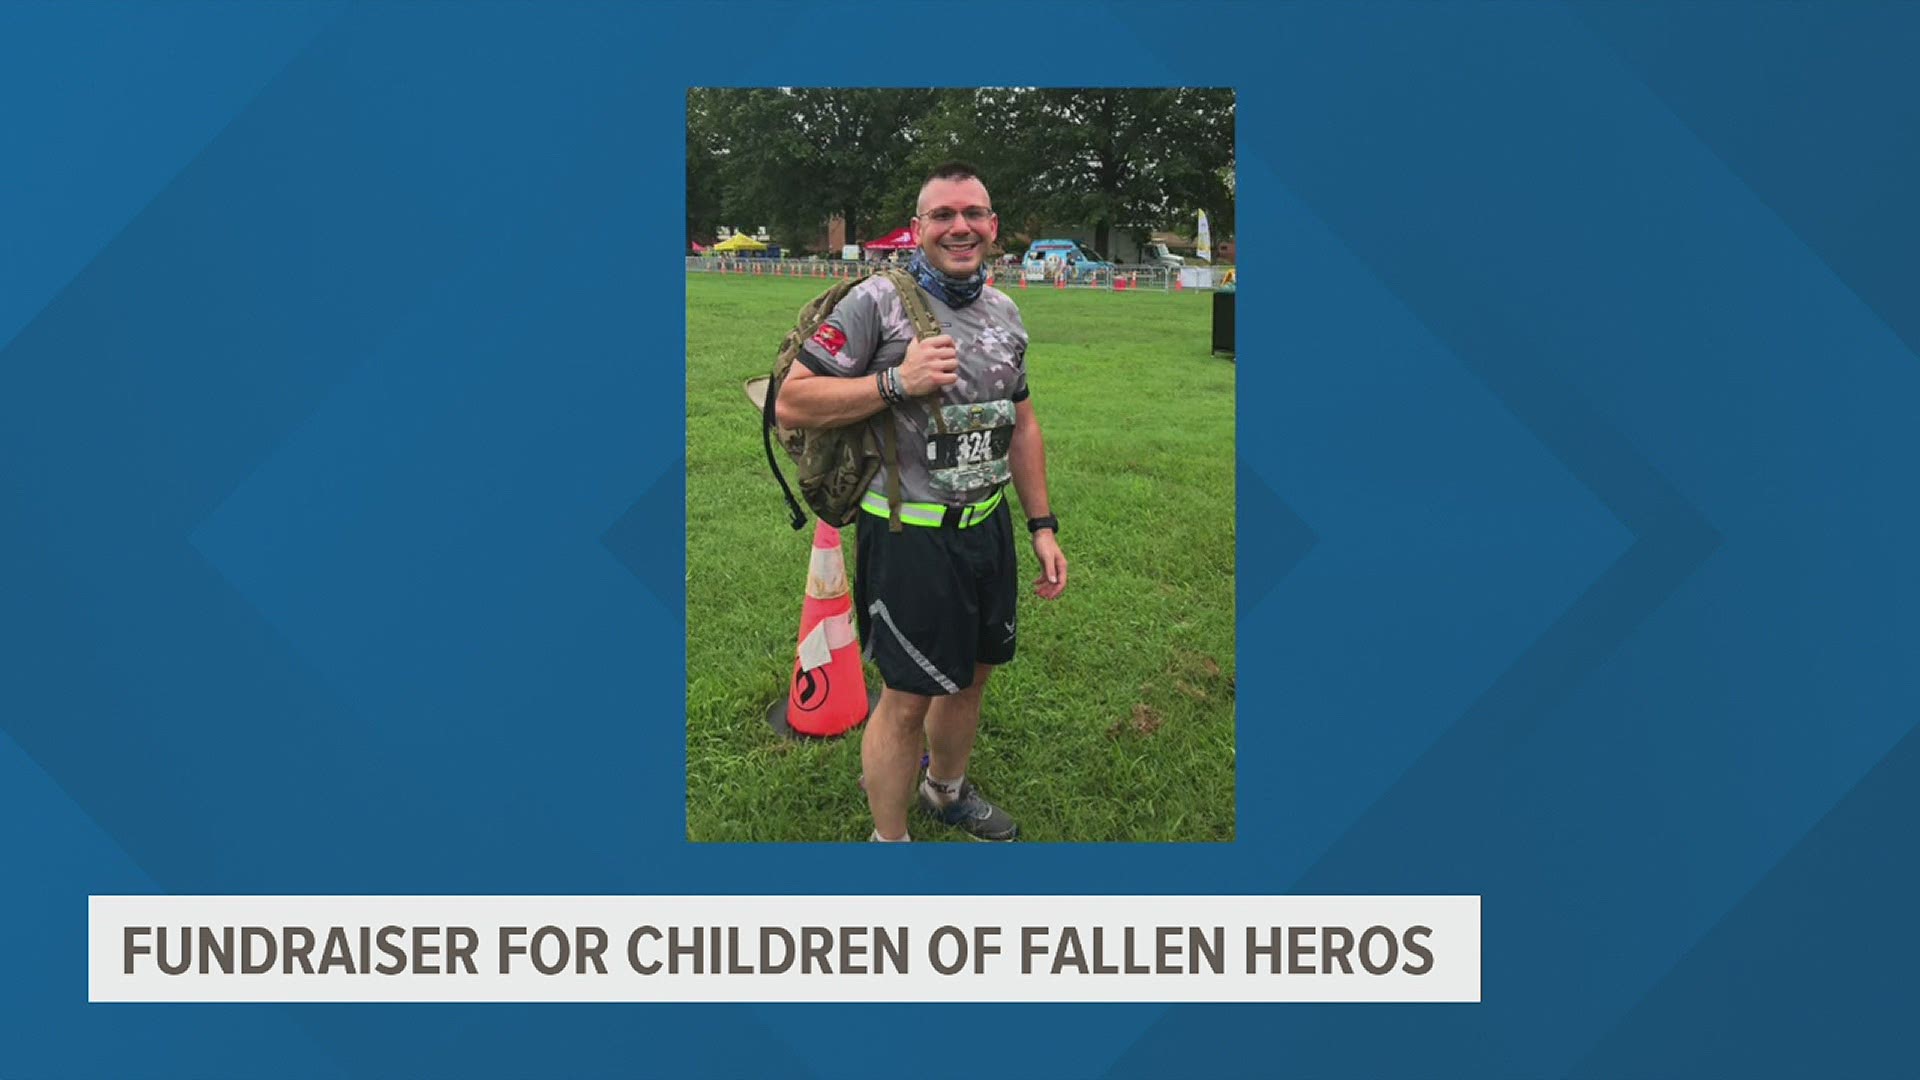 Hosting this years 25th annual Air Force Half-Marathon race, George Donavos is raising money to aid children of fallen special operation forces.